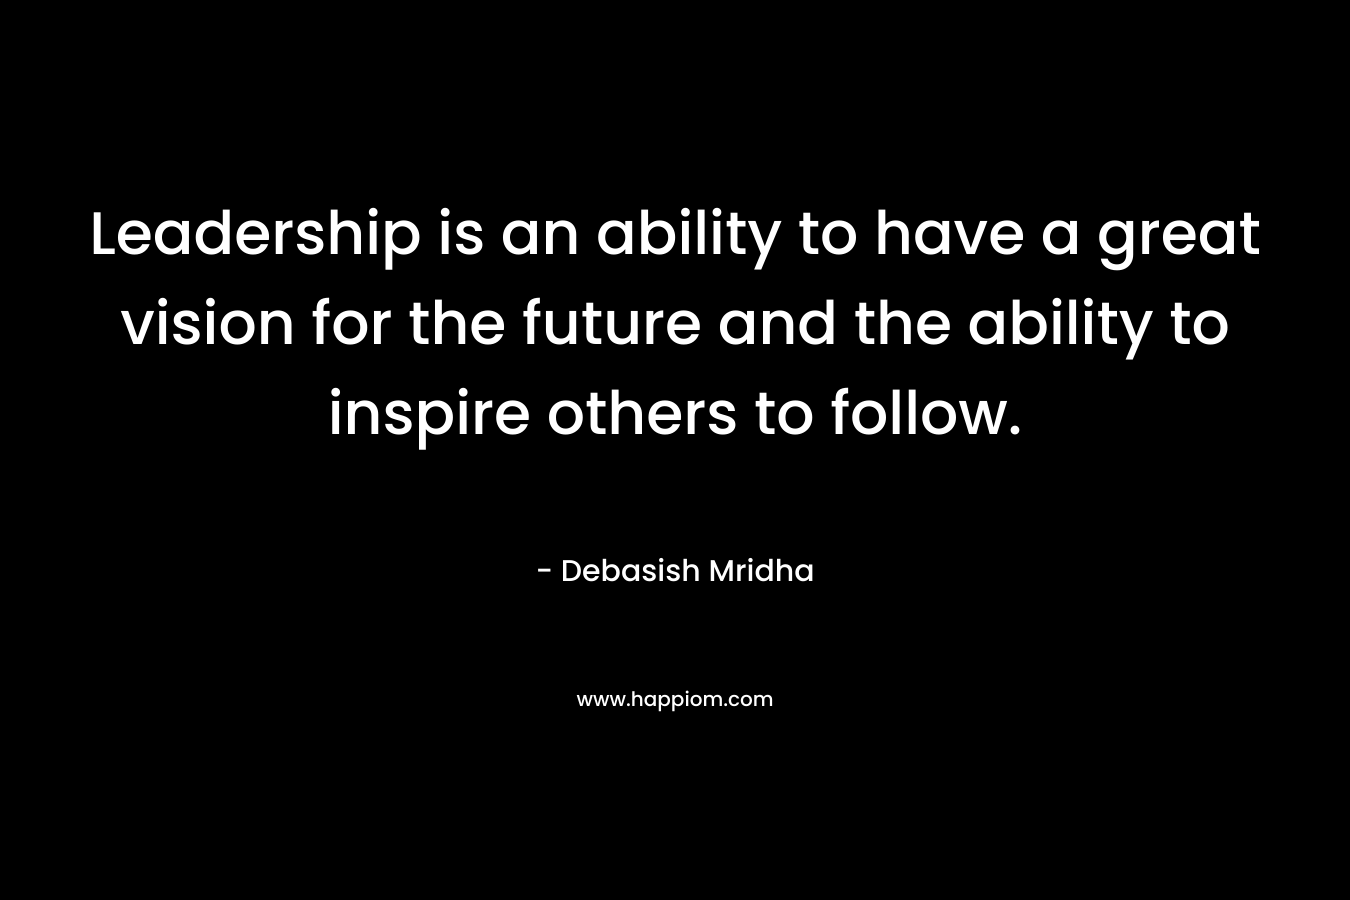 Leadership is an ability to have a great vision for the future and the ability to inspire others to follow.